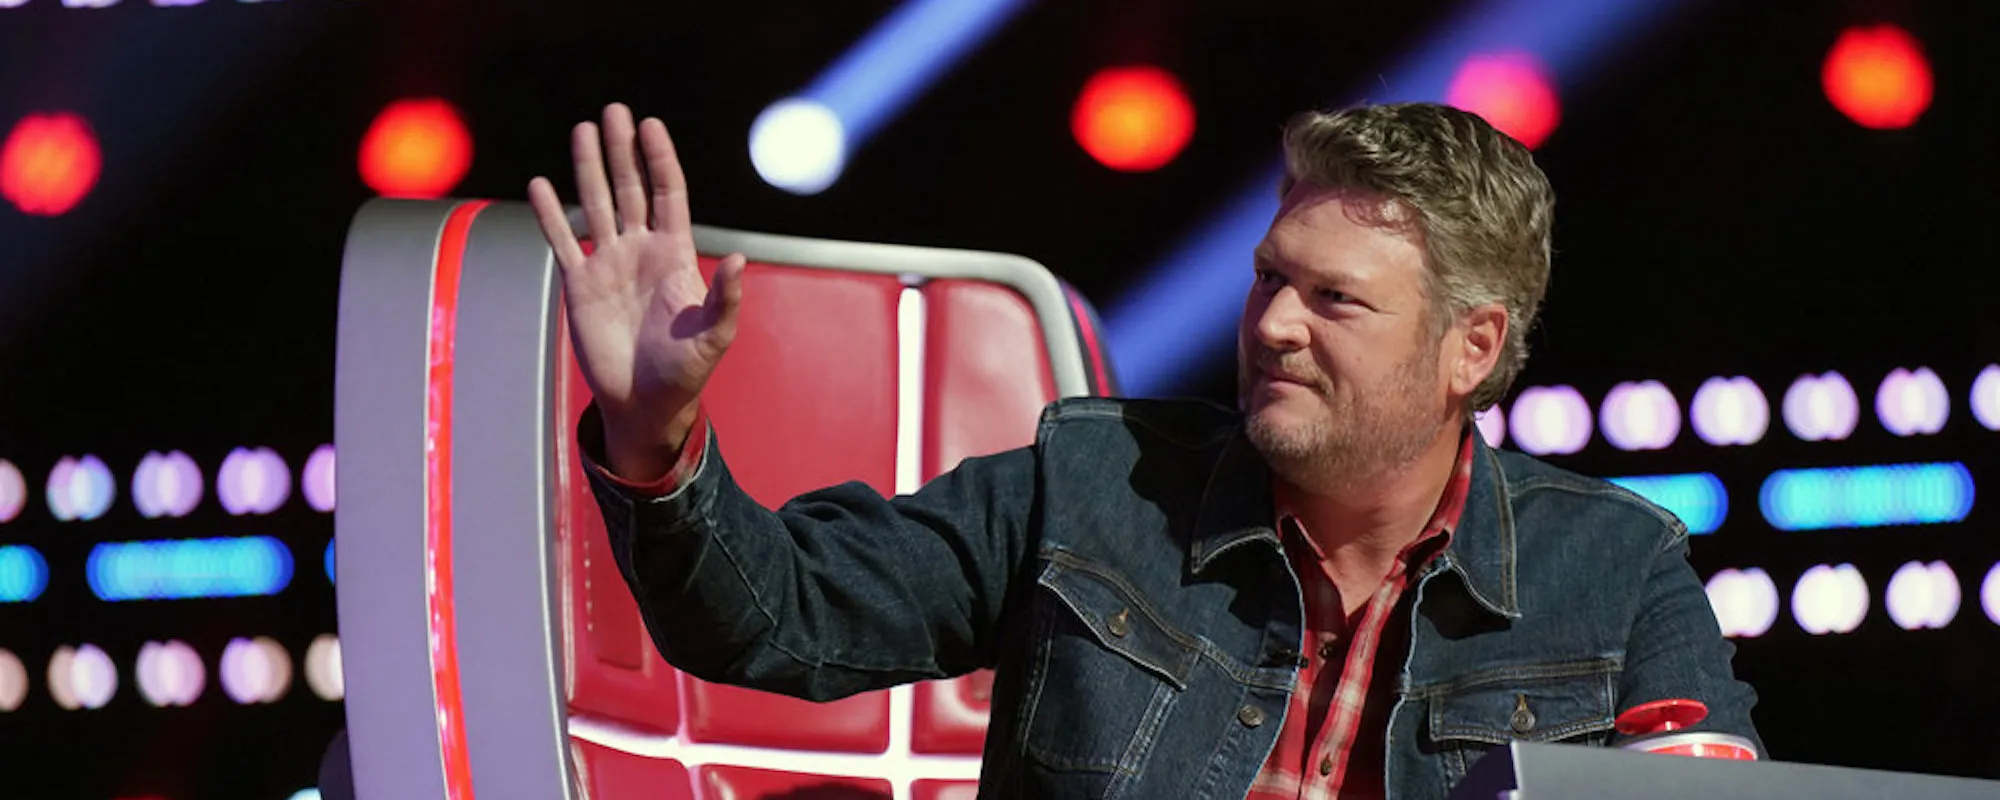 No New Episodes of ‘The Voice’ This Week, See Schedule Changes for April and May